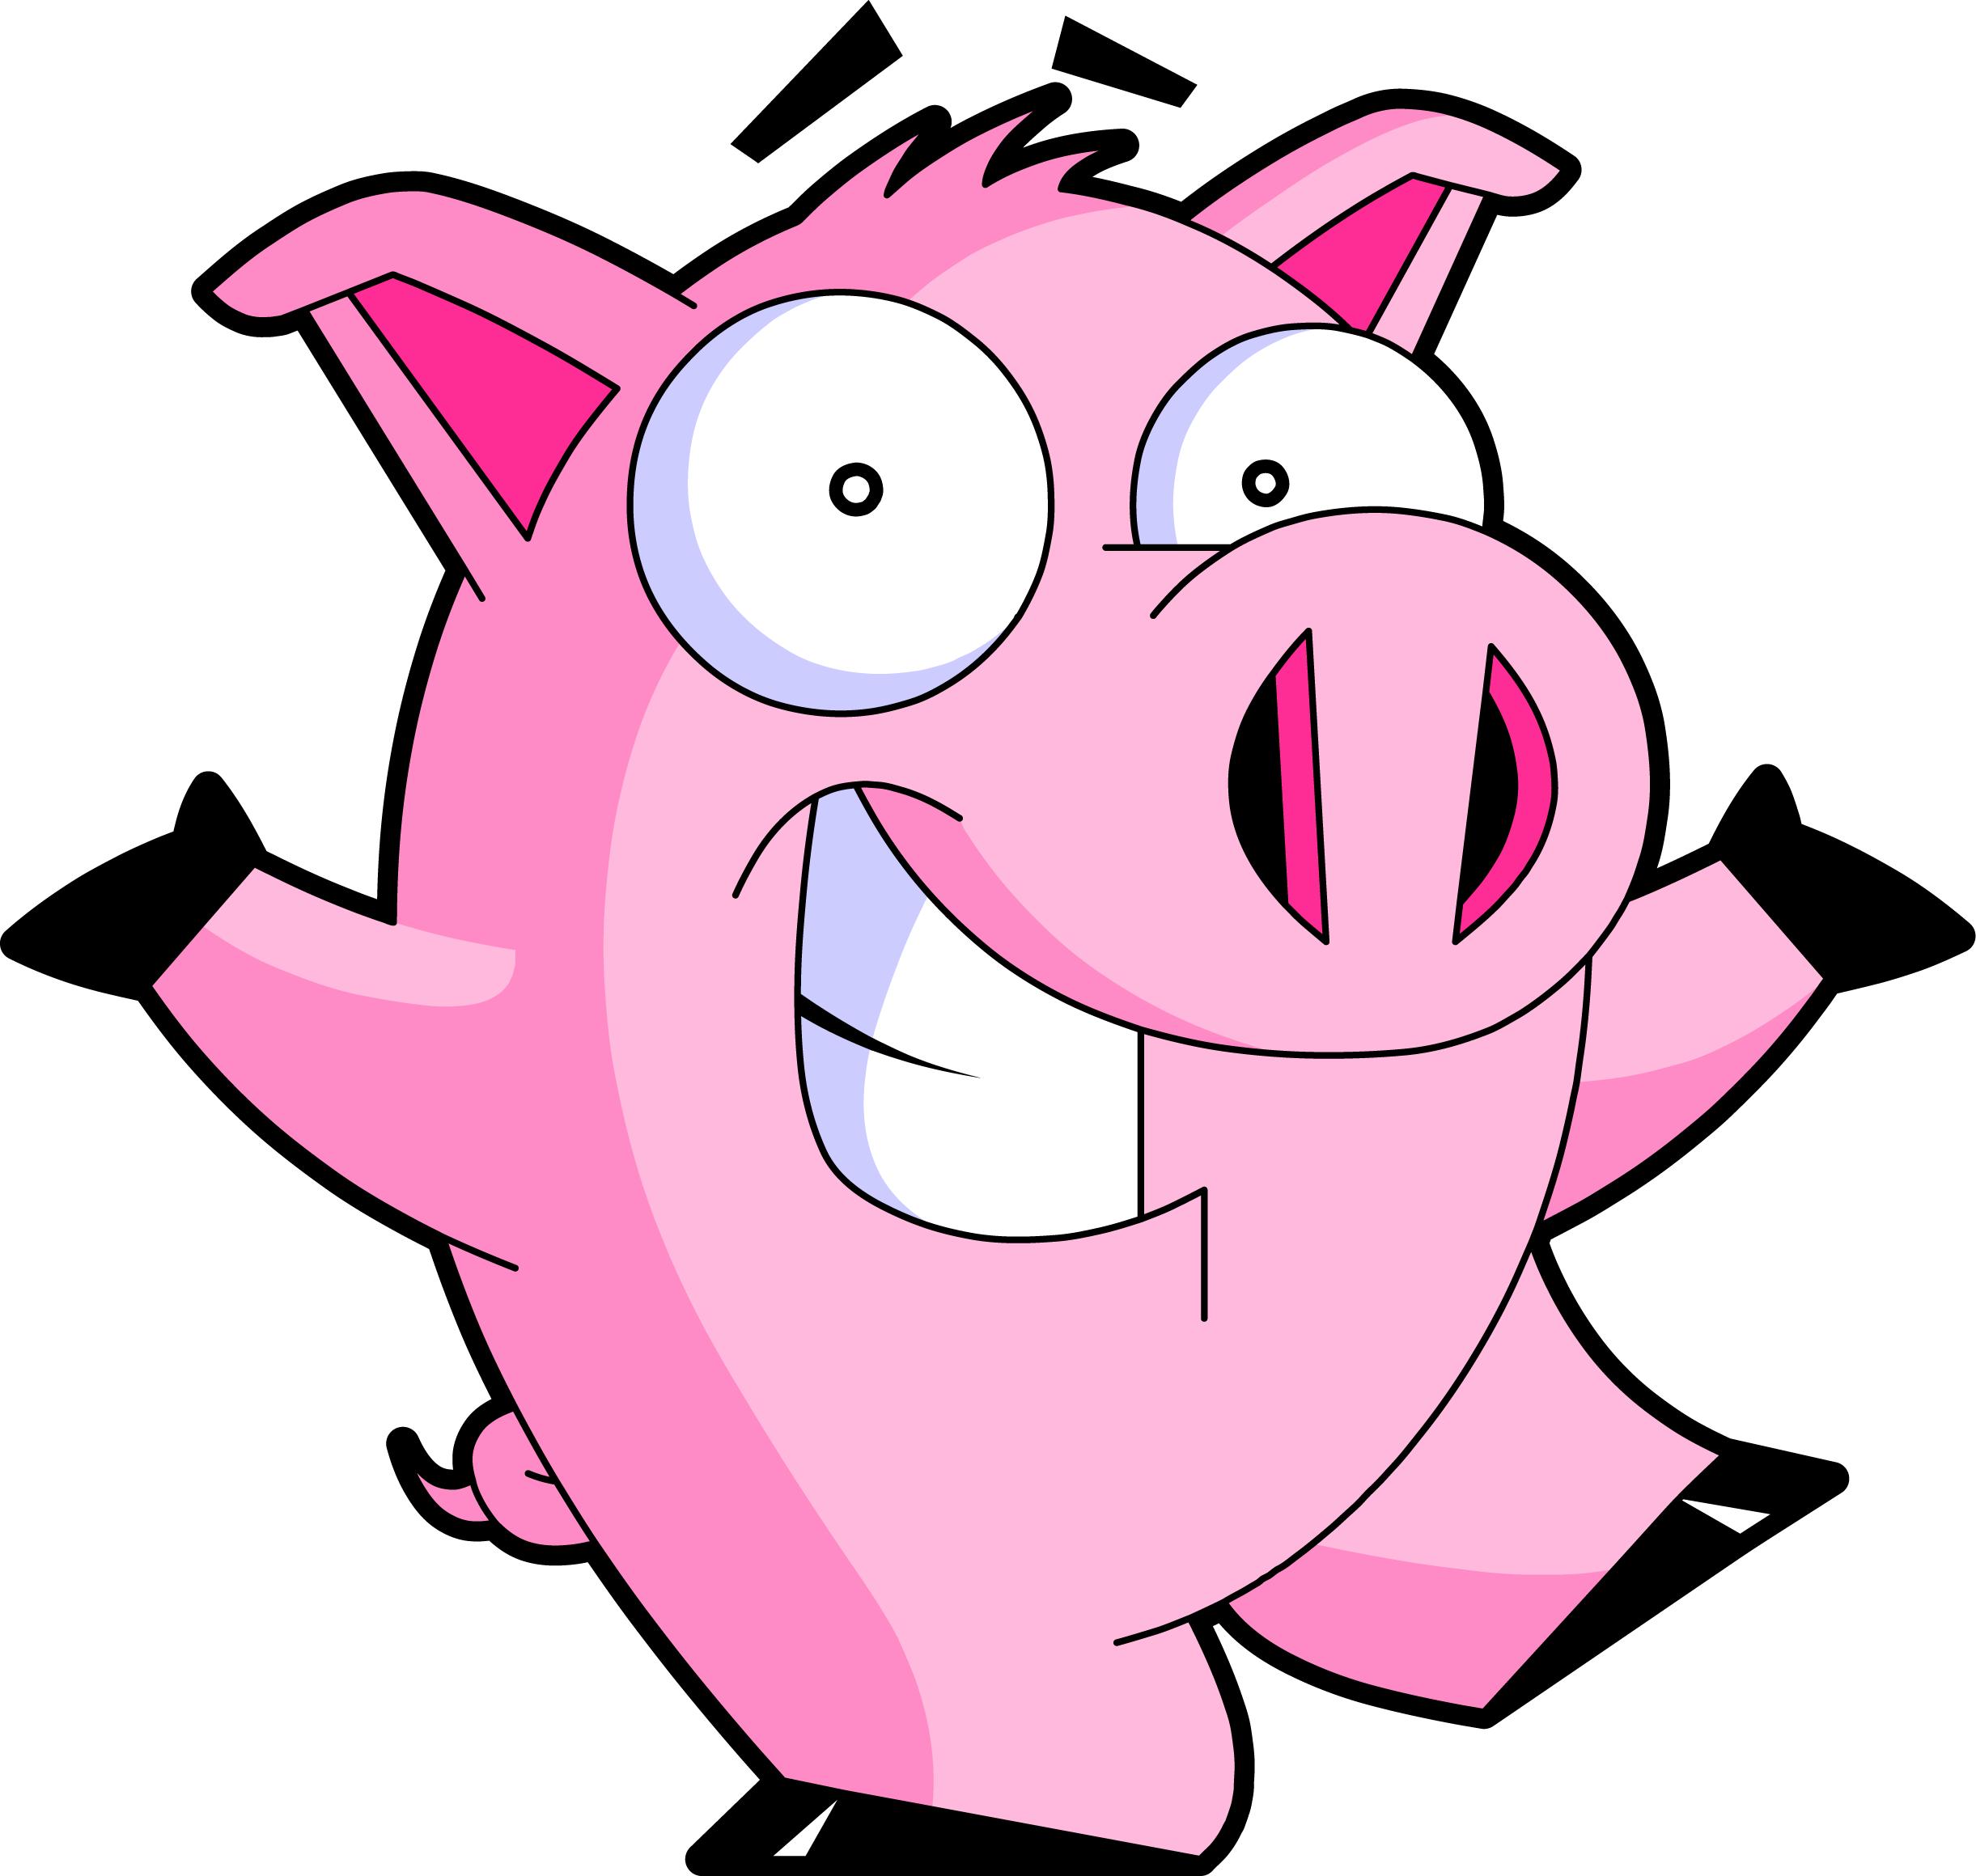 Free Animated Pigs Pictures, Download Free Clip Art, Free